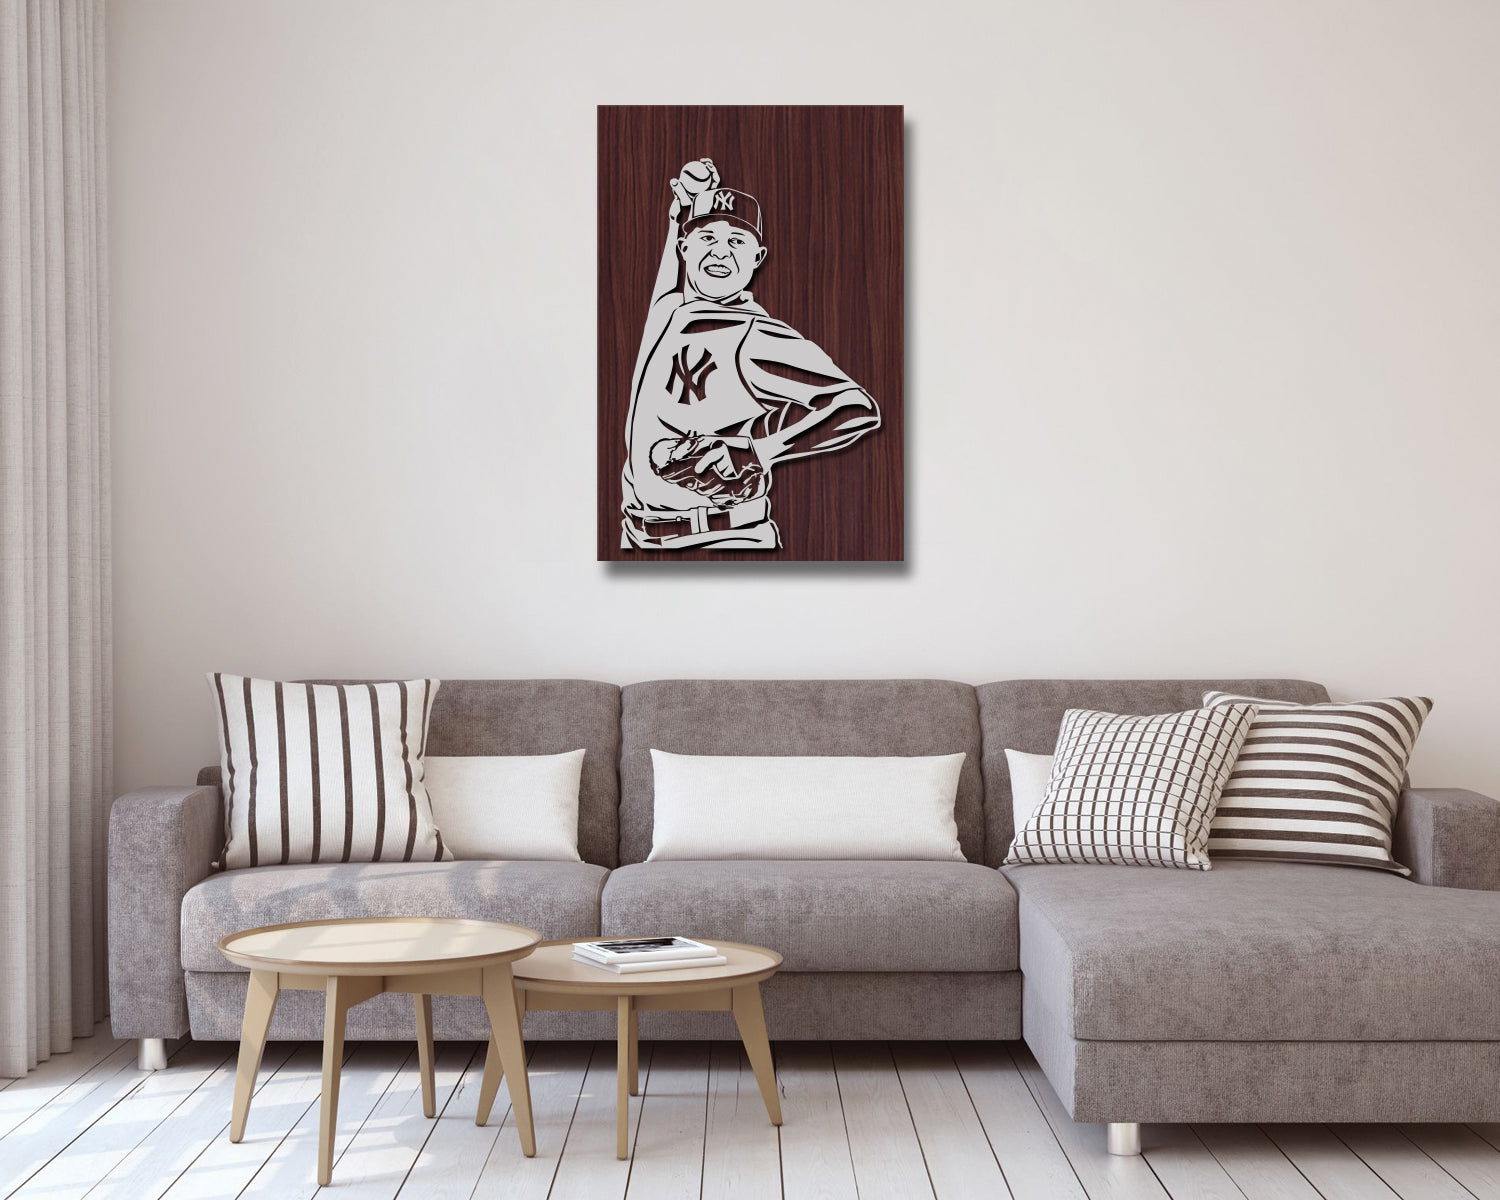 Mariano Rivera LED Wooden Decal 